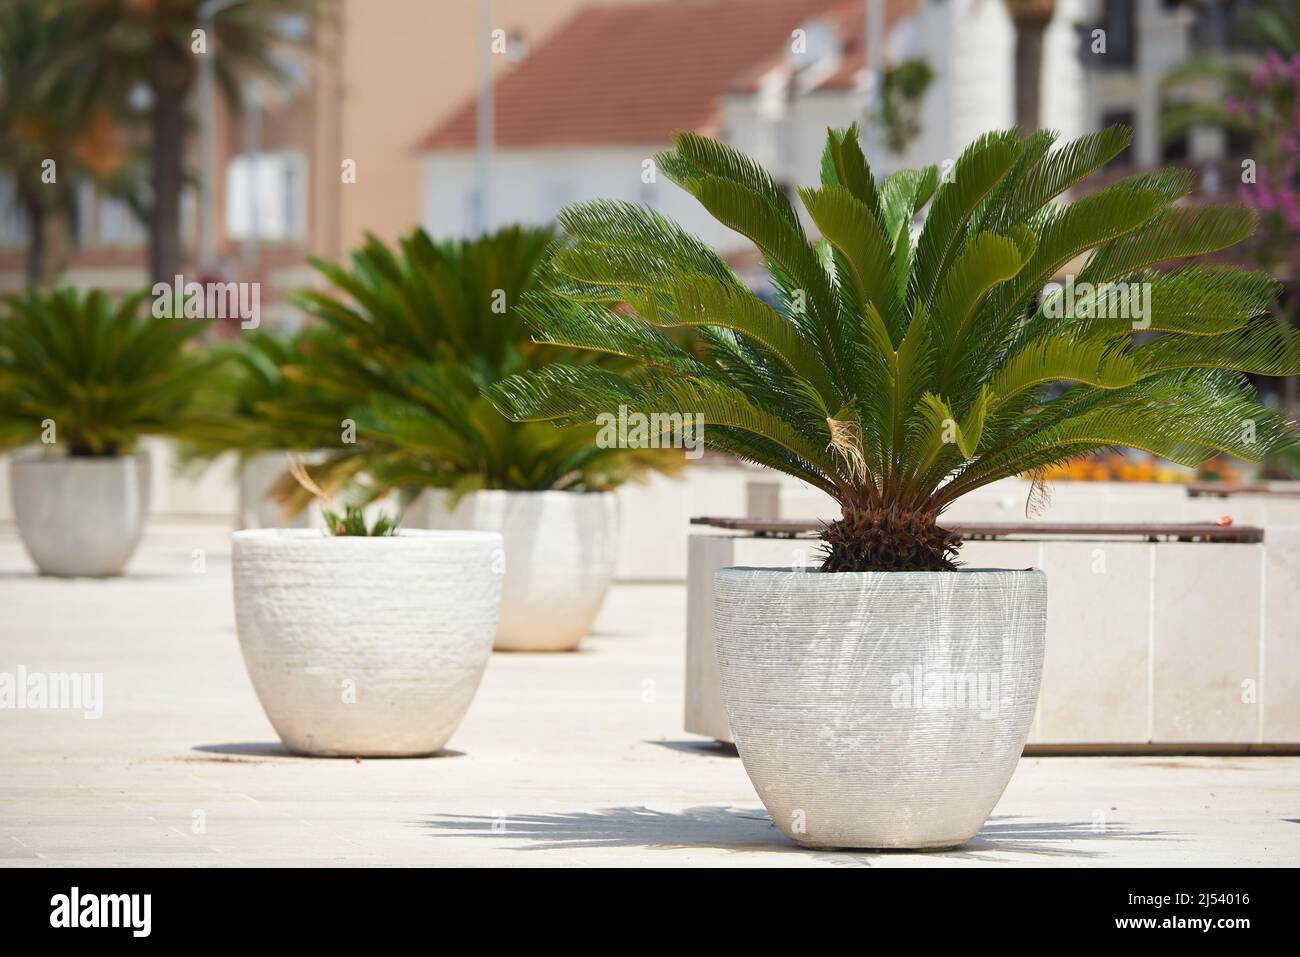 Cycas palm tree in large pots outside Stock Photo